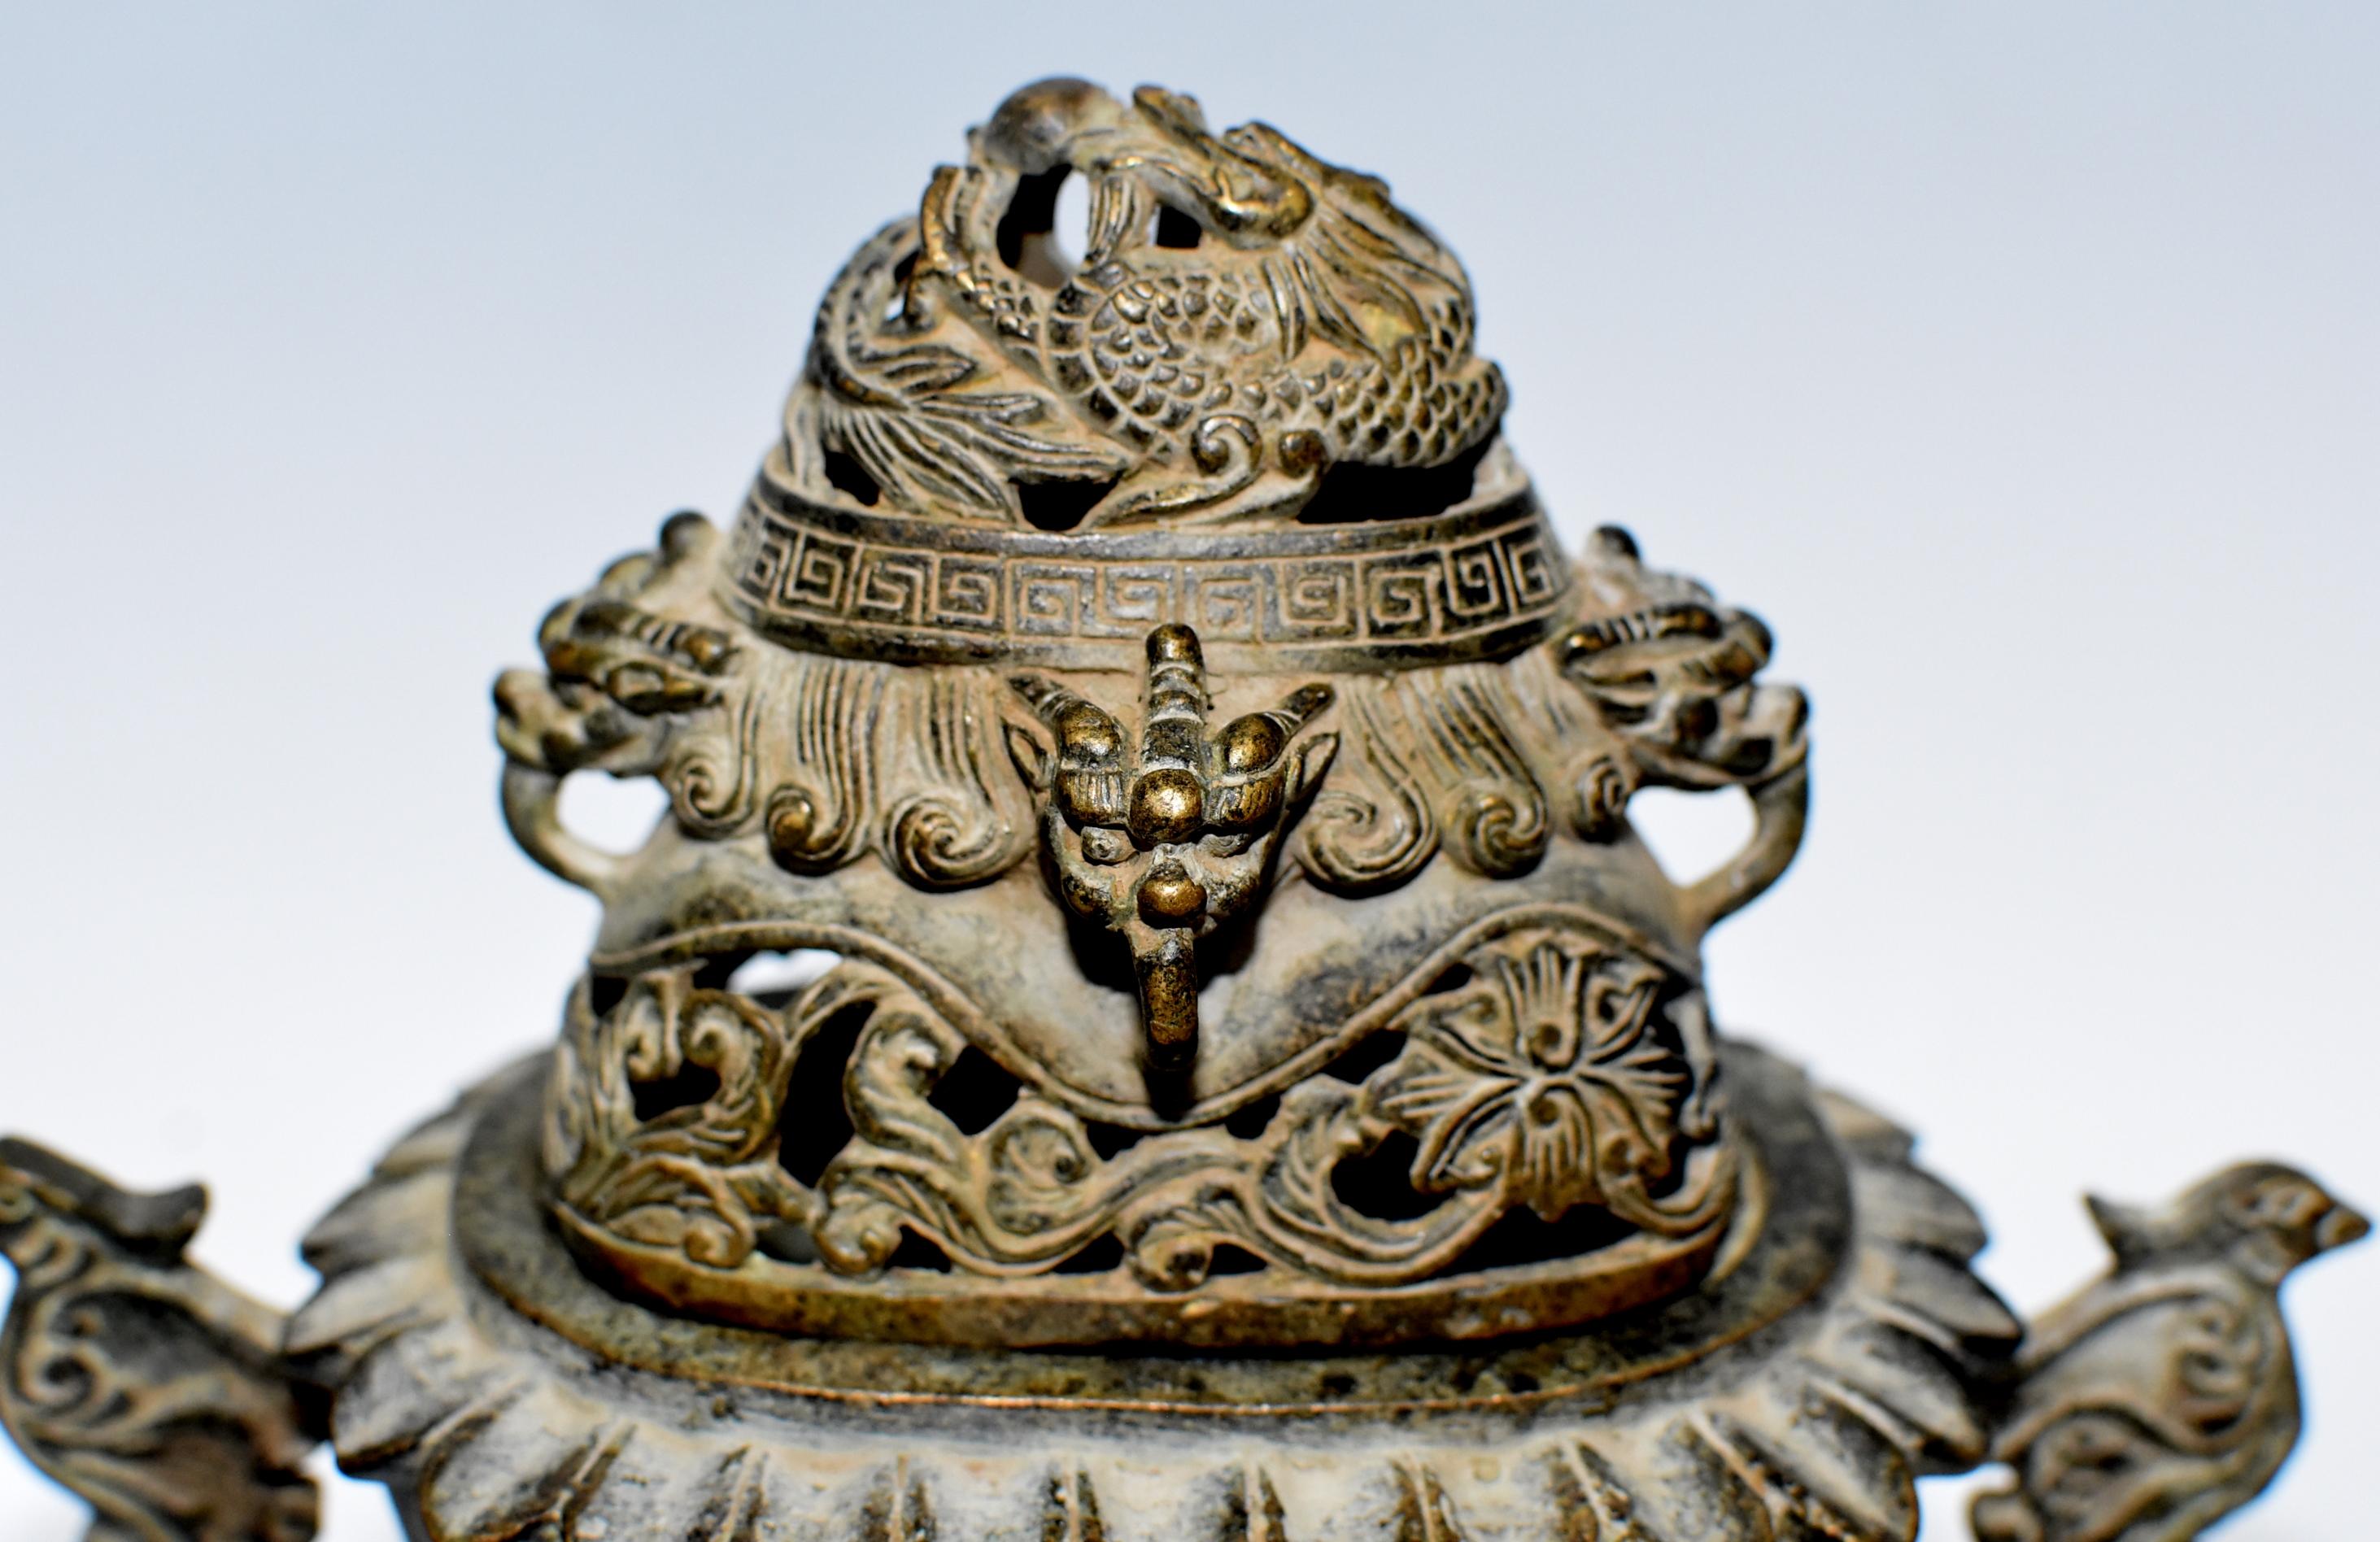 A beautiful, unique Chinese ceremonial incense burner. The pot starts with an open lotus design, followed by a pair of circling dragon and phoenix decorating the body and two ancient form birds acting as handles. A coiled dragon on the lid